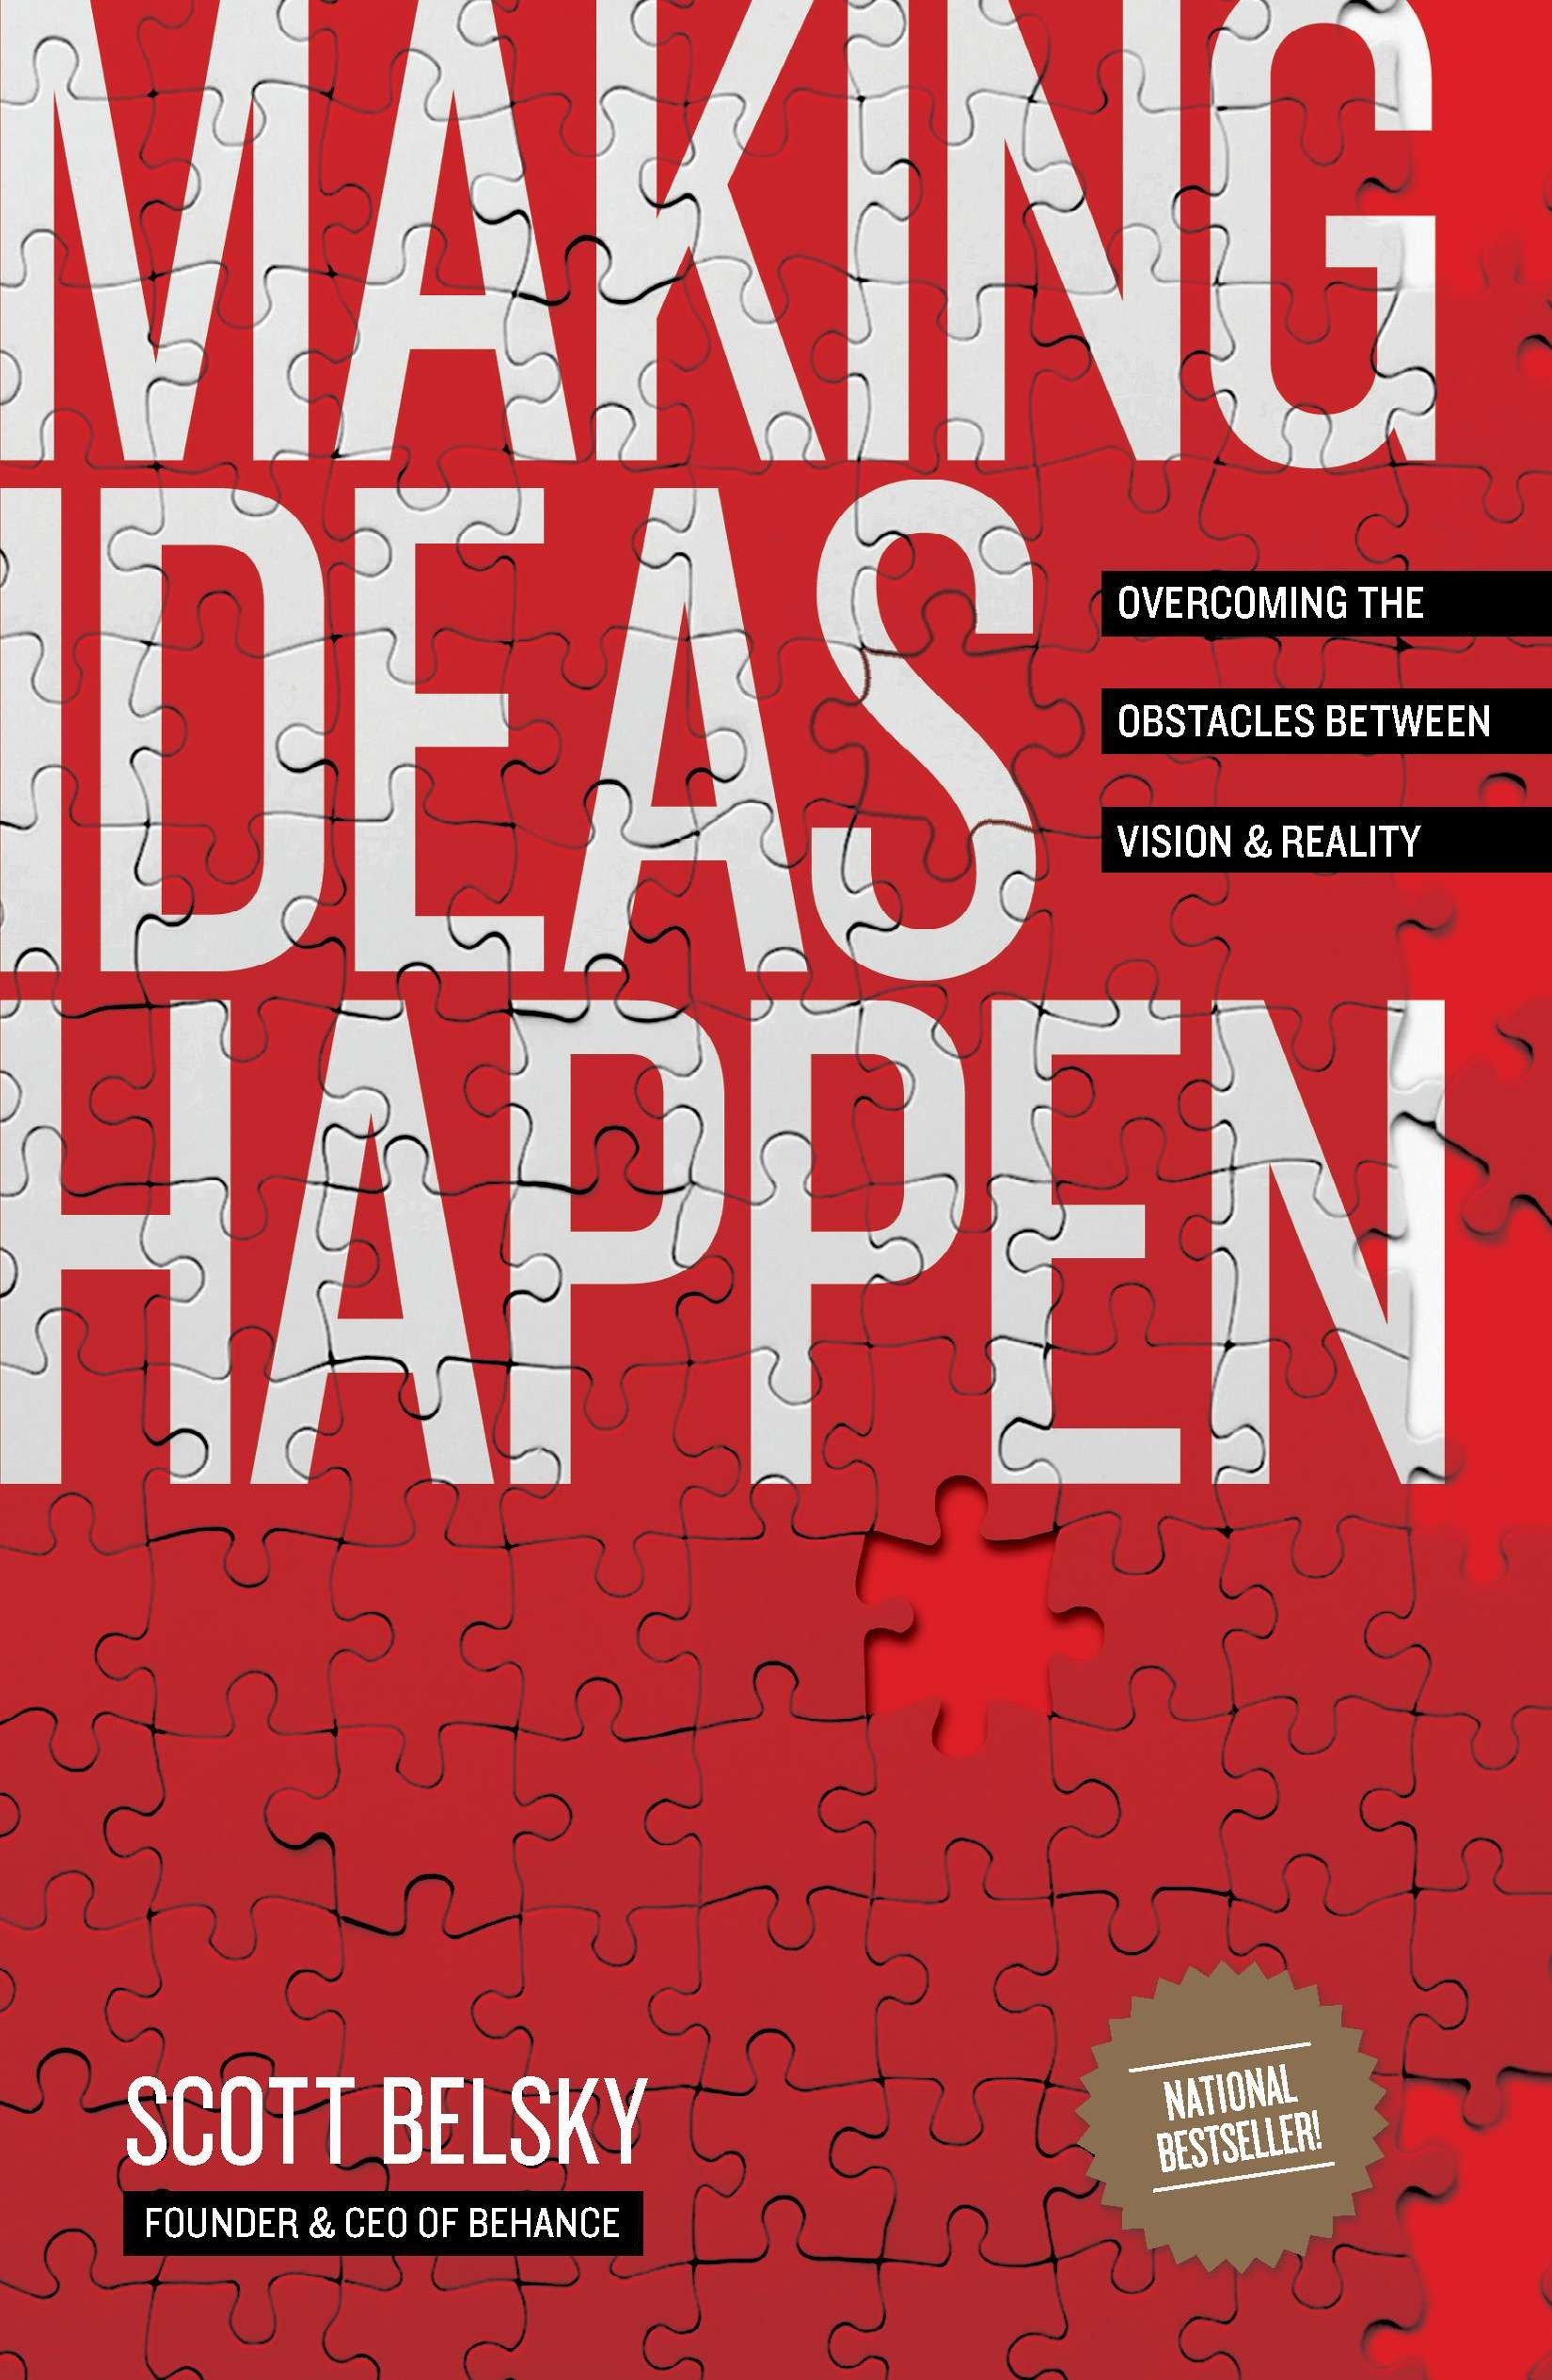 Book summary Making Ideas Happen provides you the condensed version of the core thoughts and concepts in the book.